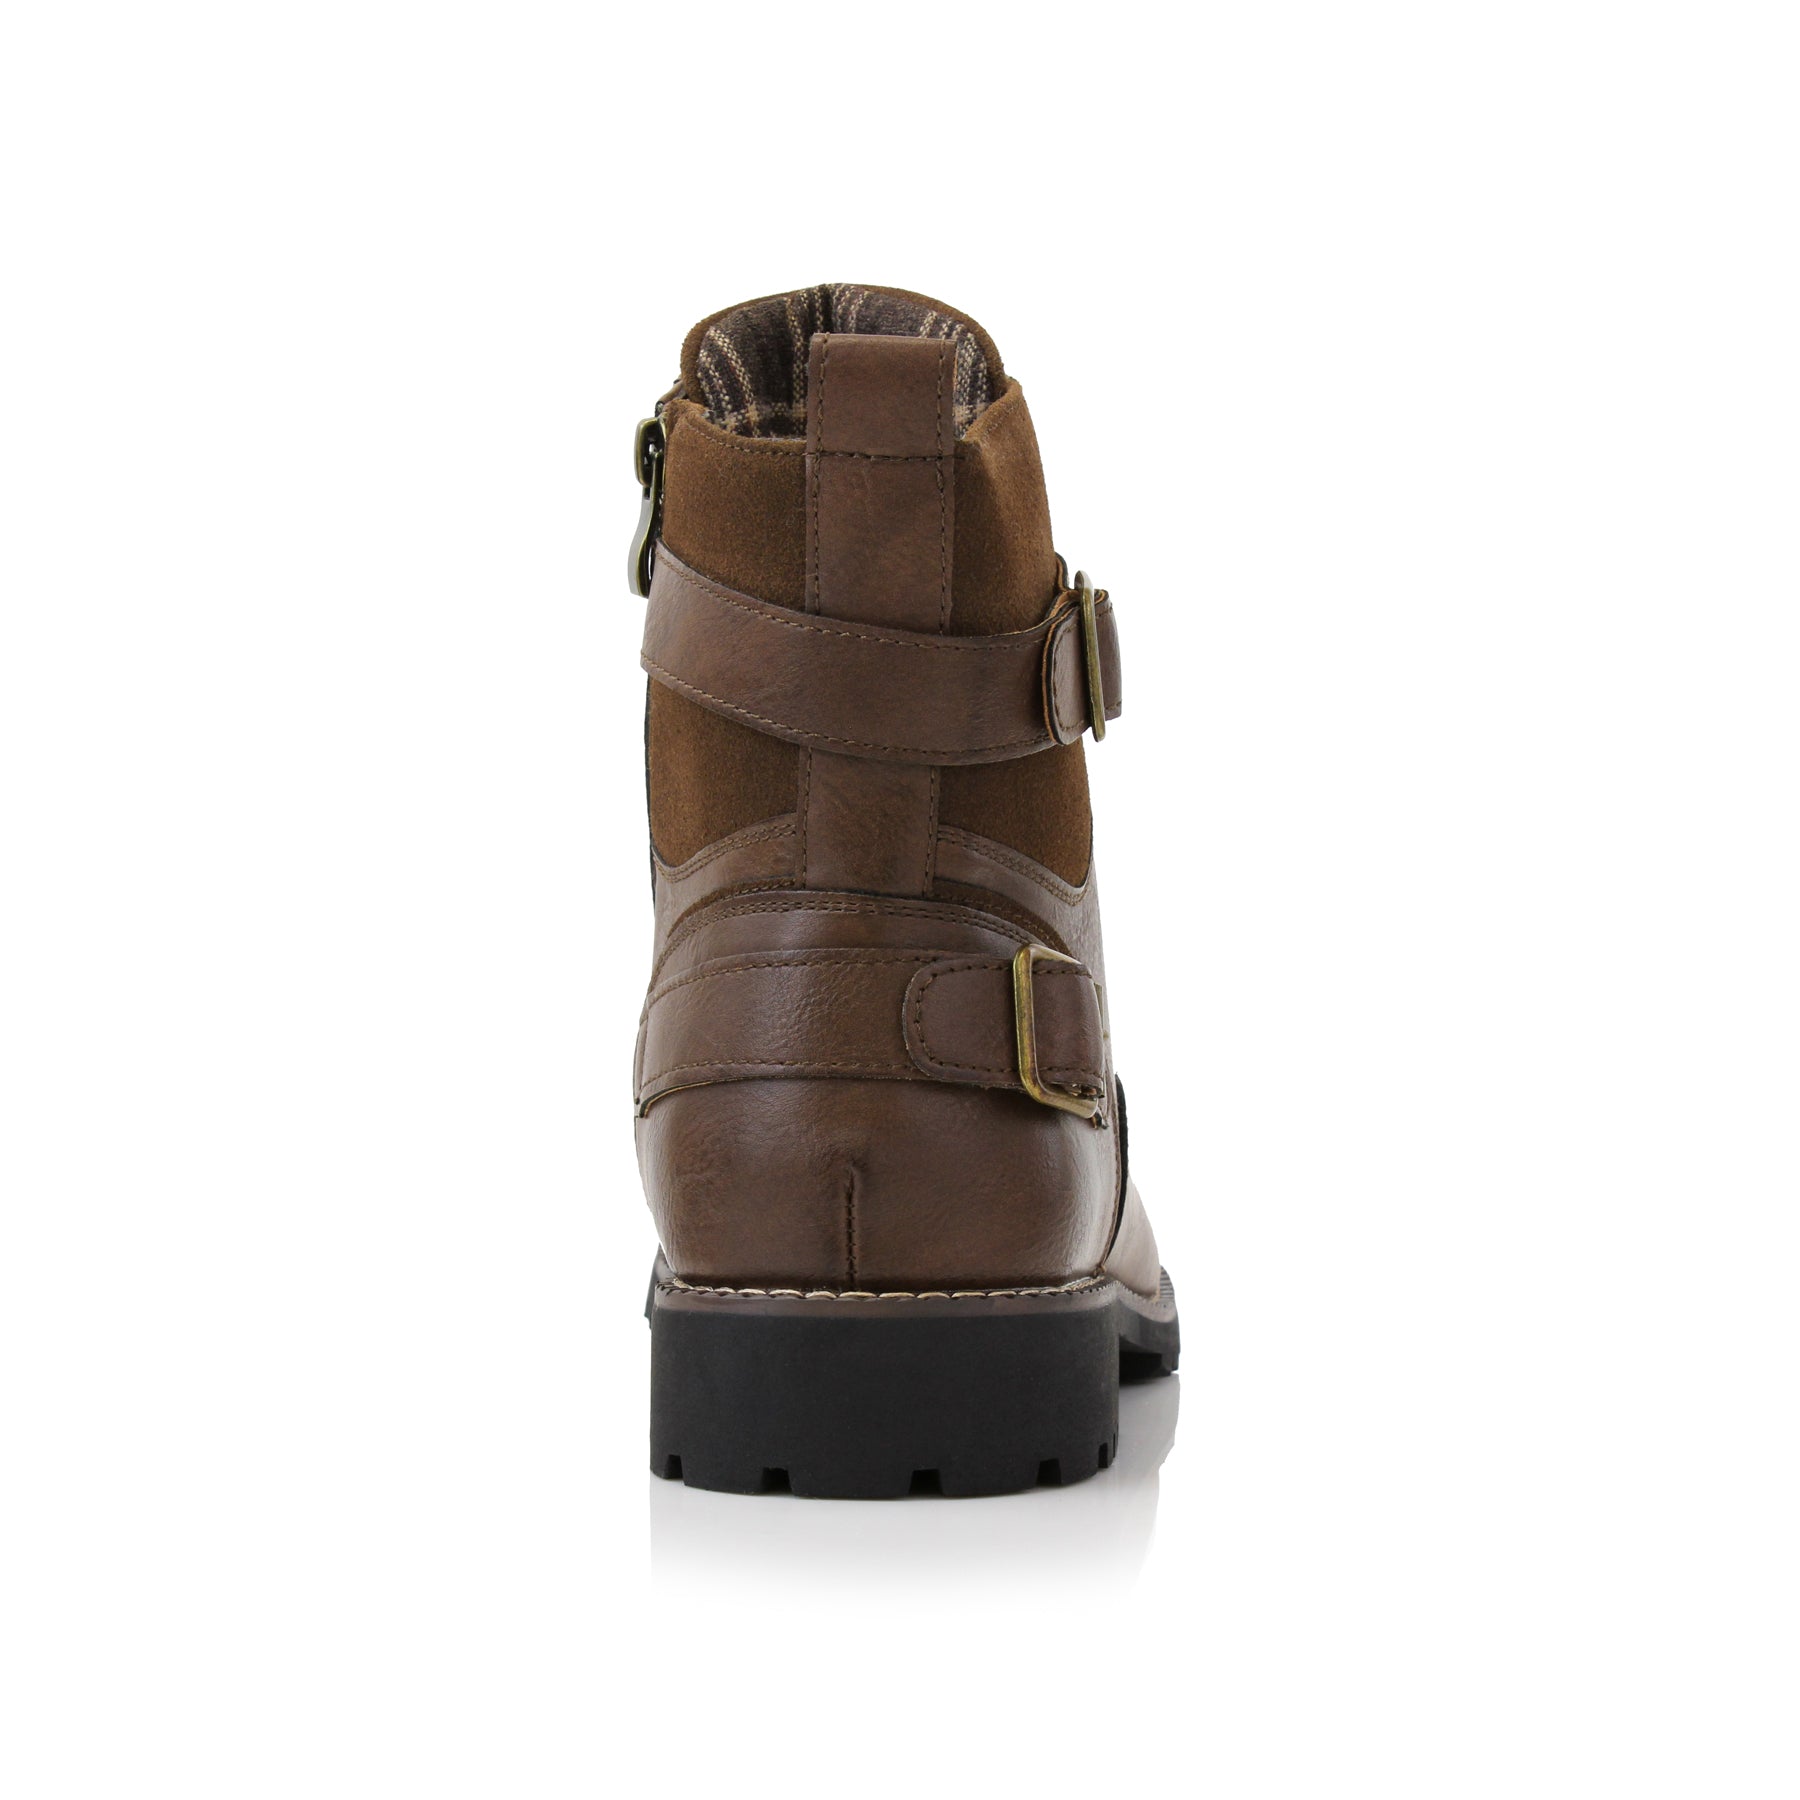 Duo-Textured Combat Boots | Patrick by Polar Fox | Conal Footwear | Back Angle View